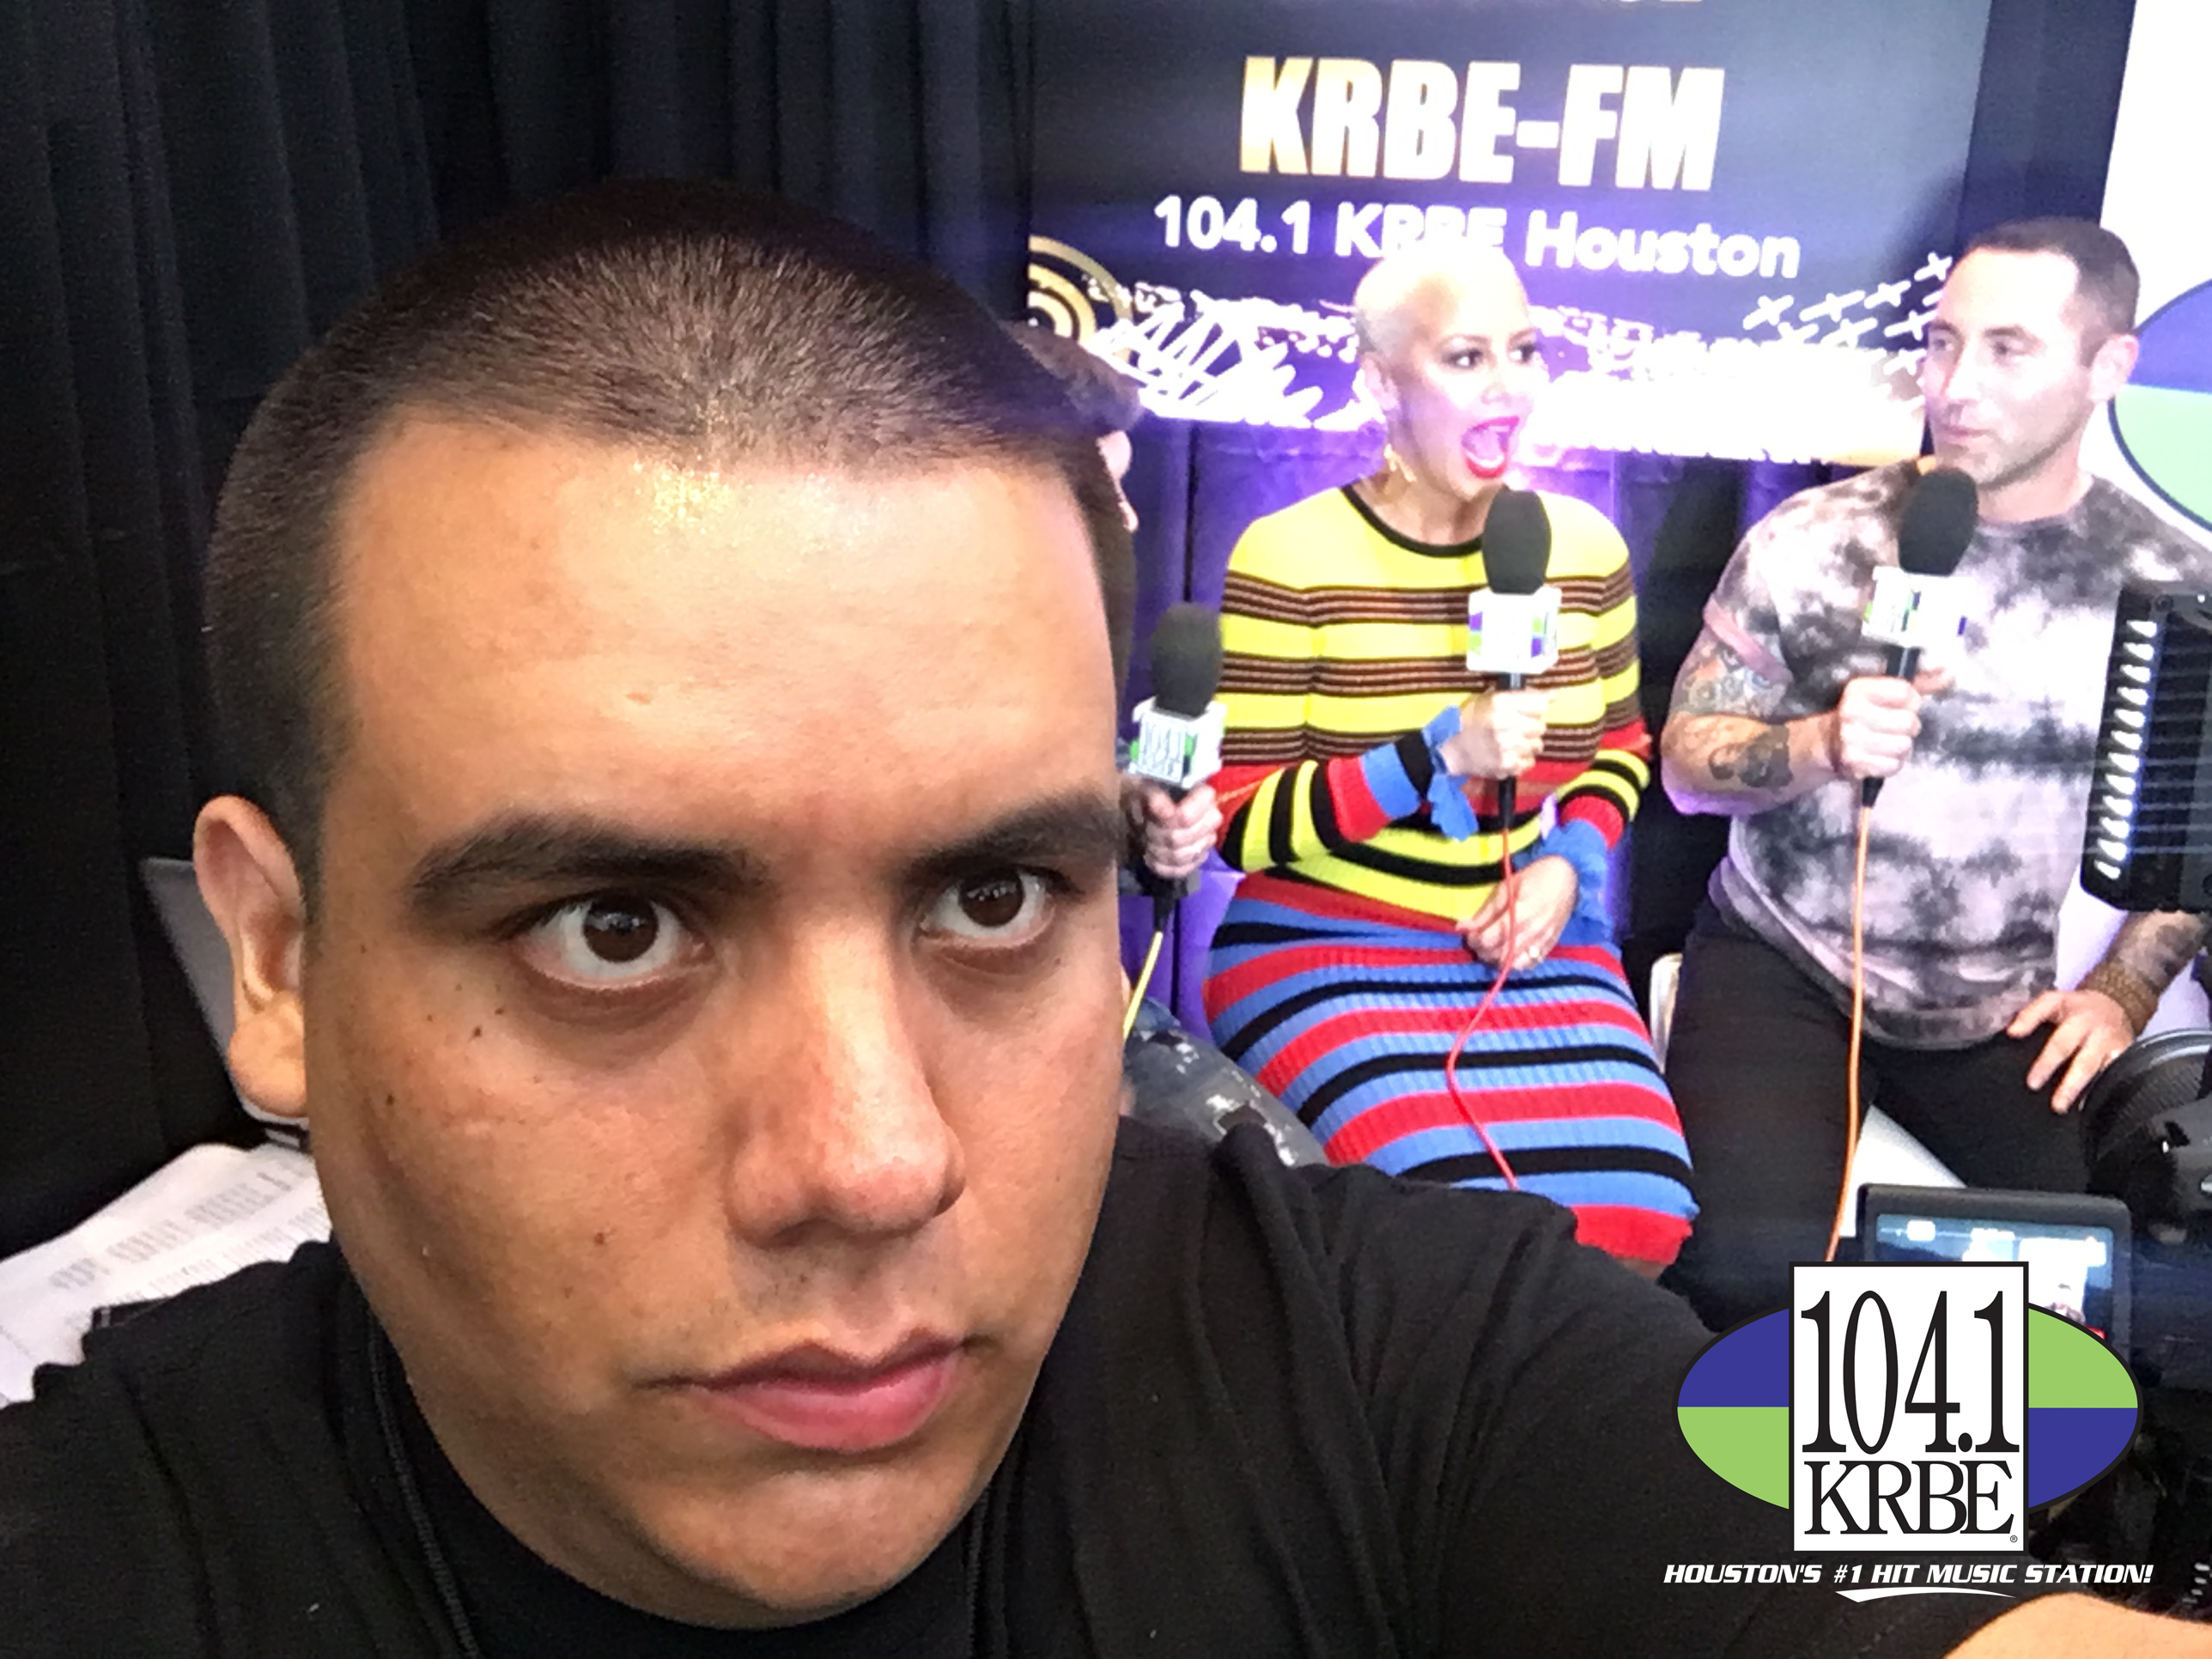 PHOTO: E.J. snaps a selfie with Amber Rose. Photo courtesy of E.J. Santillan and 104.1 KRBE.